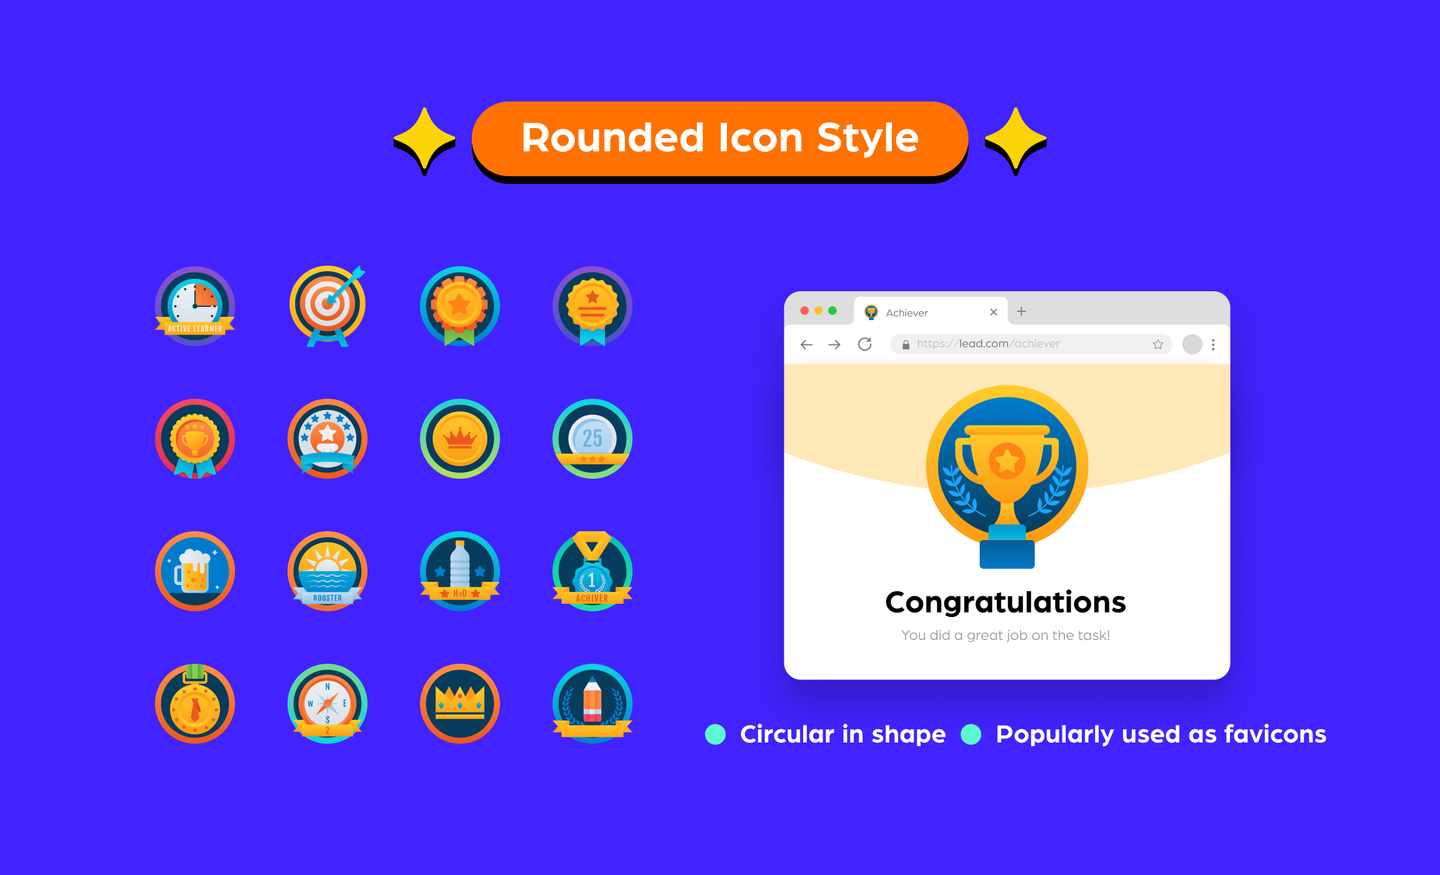 A guide to the rounded icon style